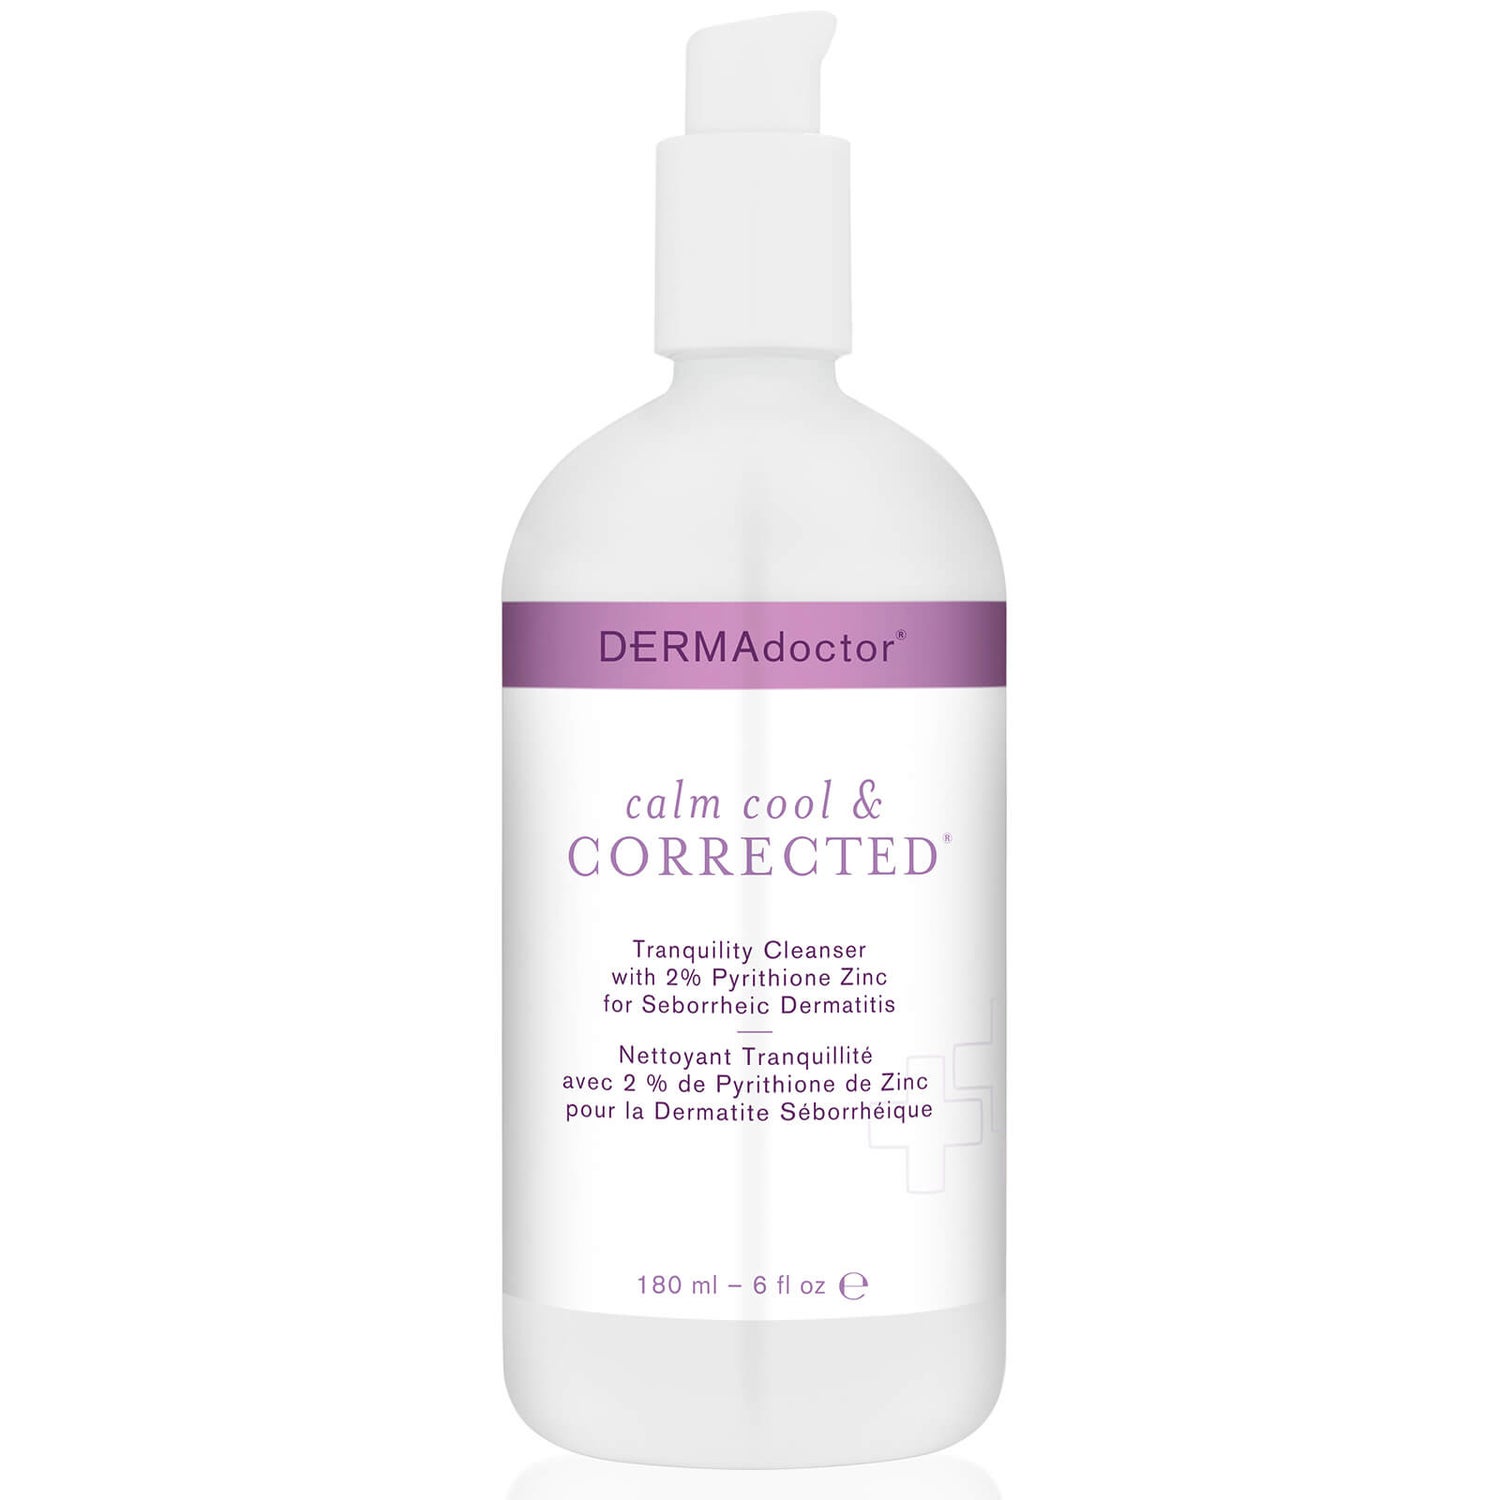 DERMAdoctor Calm Cool and Corrected Tranquility Cleanser with 2 Pyrithione Zinc for Seborrheic